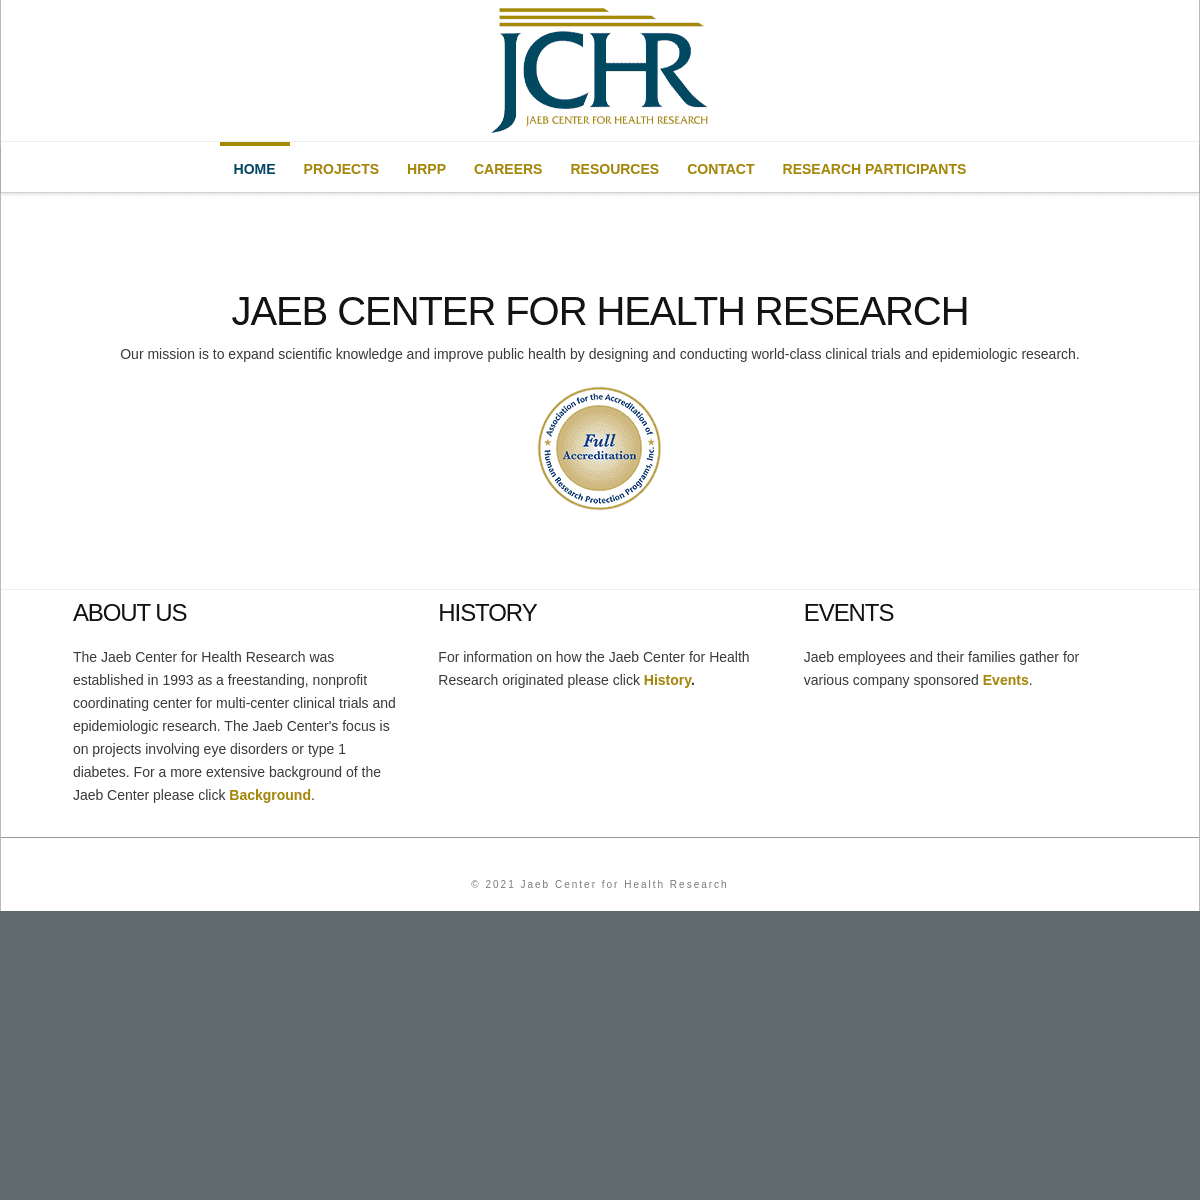 A complete backup of https://jaeb.org